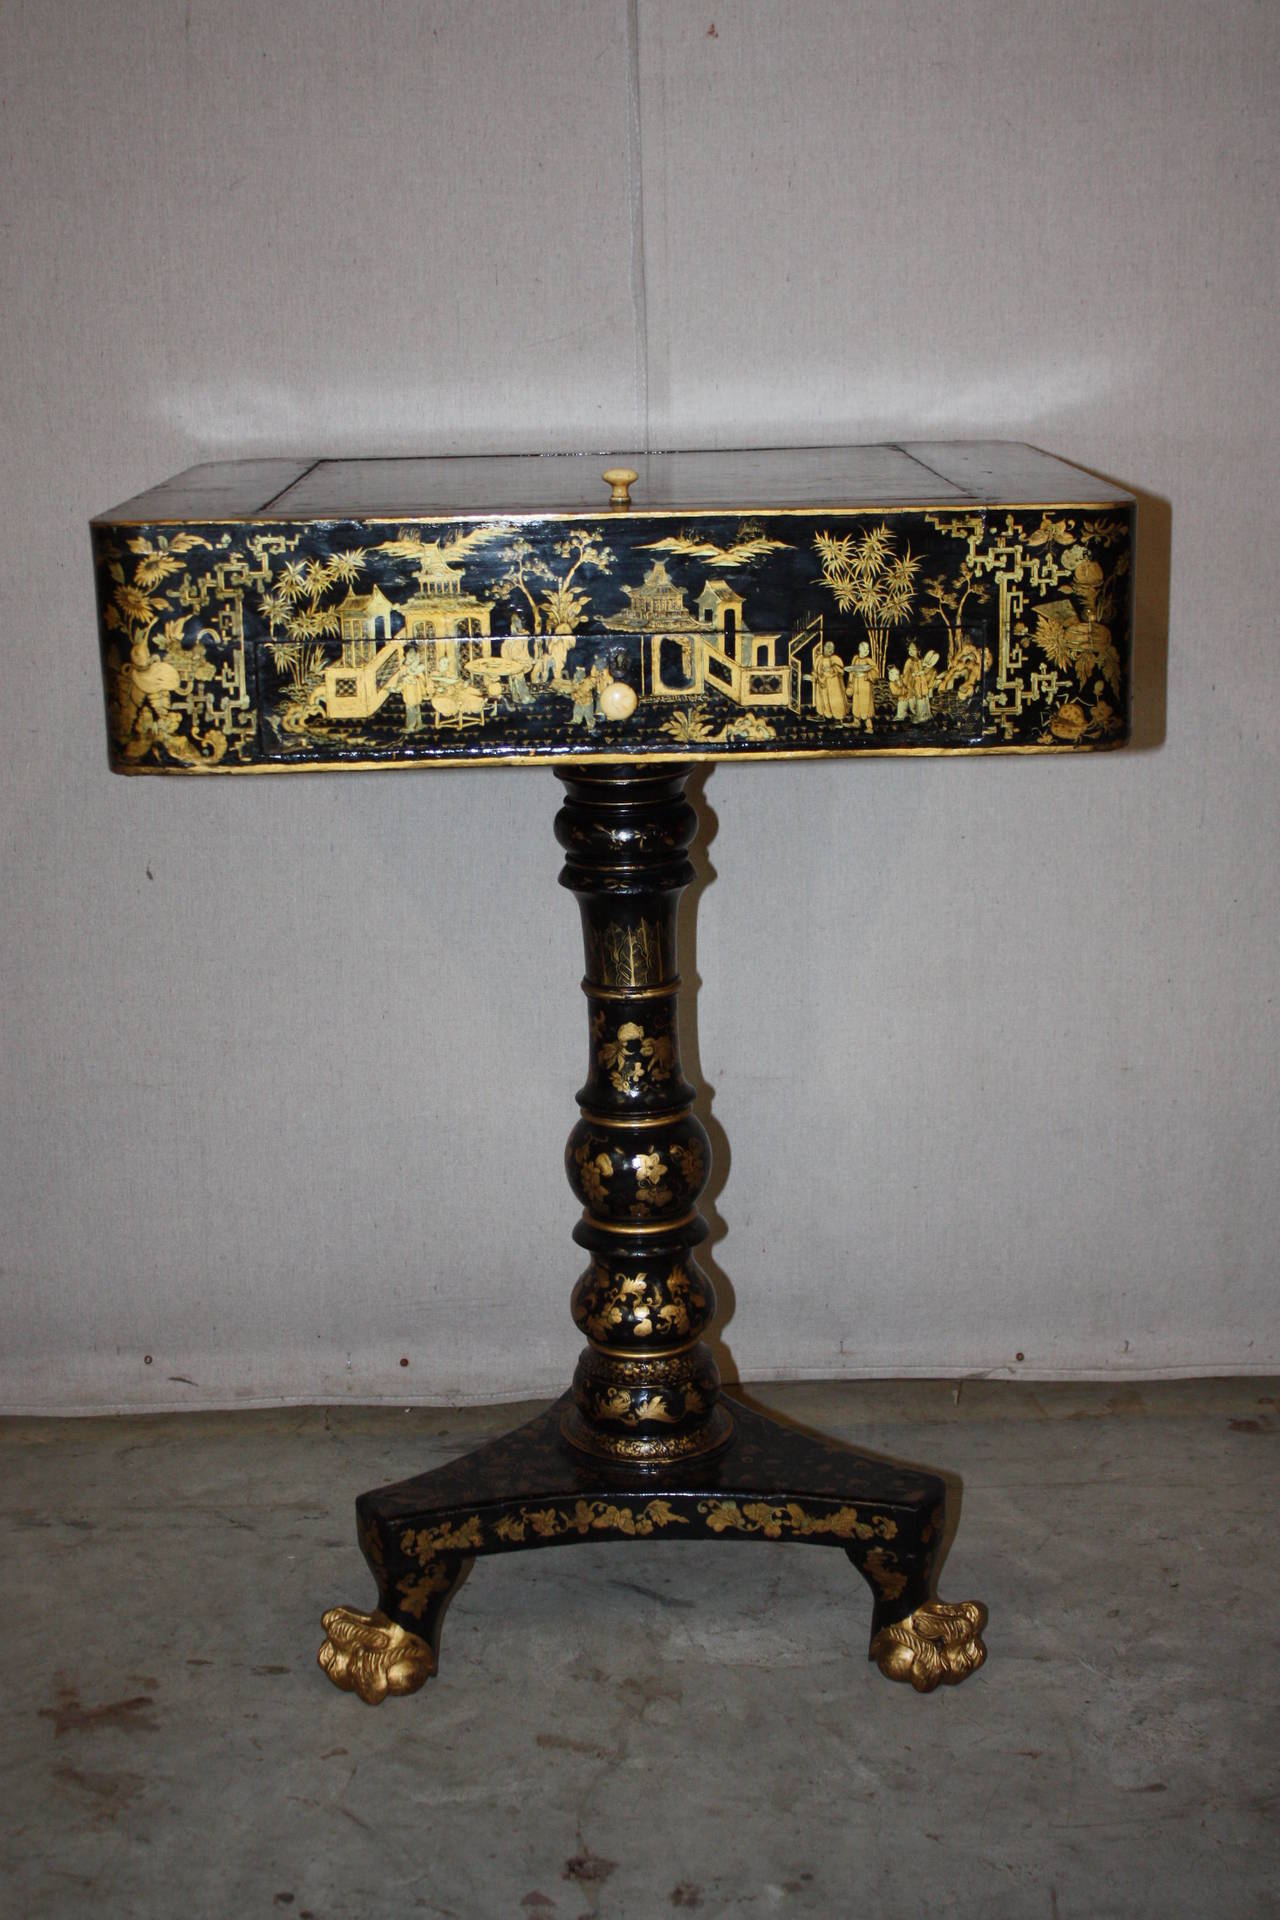 This is an absolutely stunning chinoiserie game table I purchased in England.  Every side is painted as is the leg  and the base.  The top lifts off to reveal a backgammon board.  The top can be flipped and placed back into its cradle to turn the